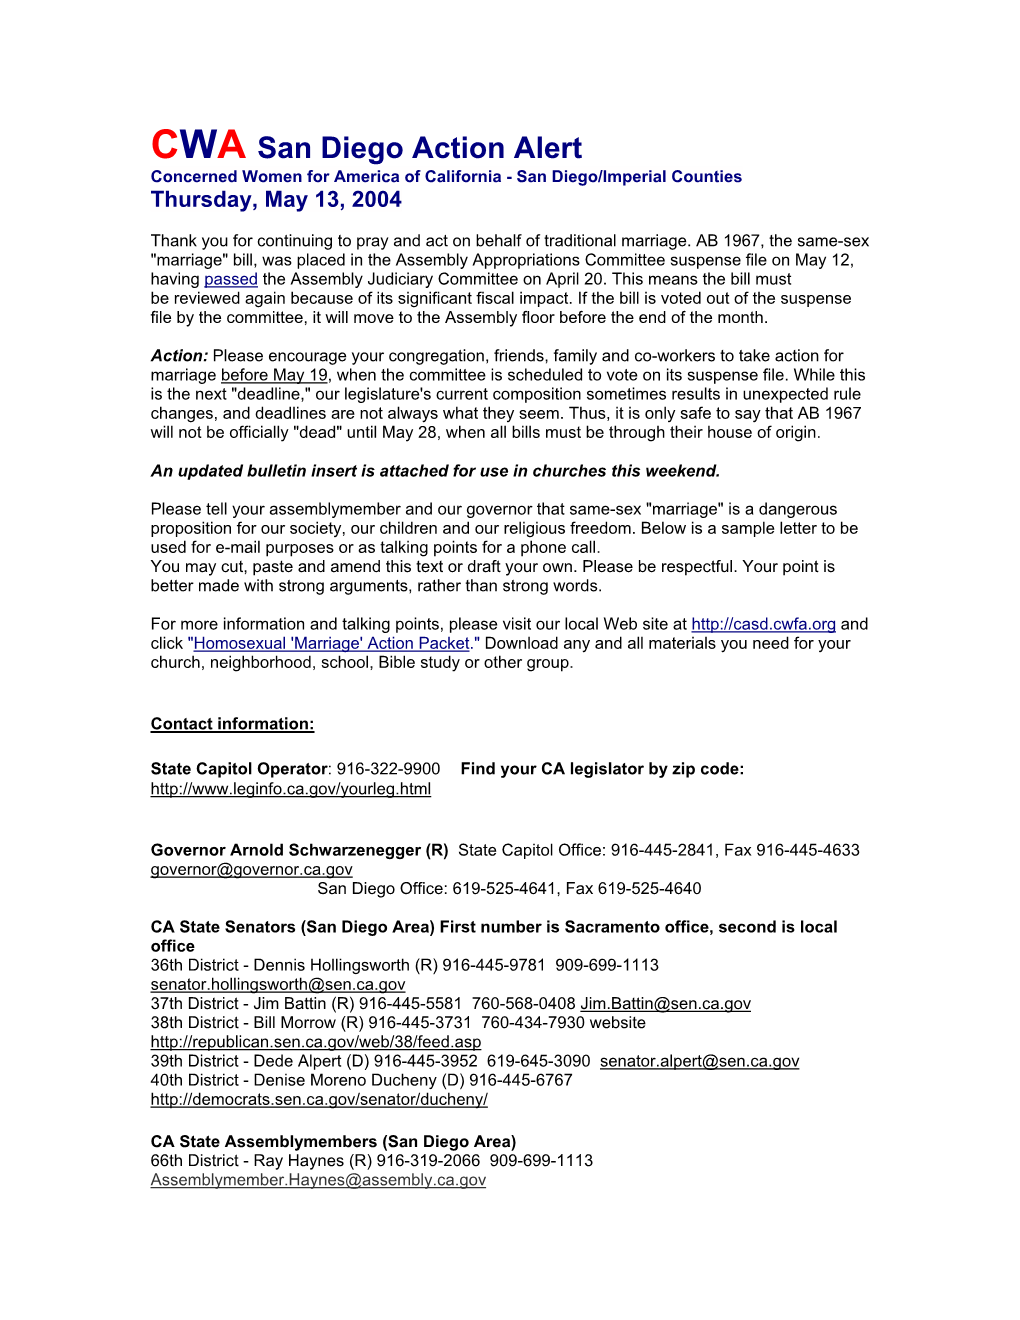 CWA San Diego Action Alert Concerned Women for America of California - San Diego/Imperial Counties Thursday, May 13, 2004